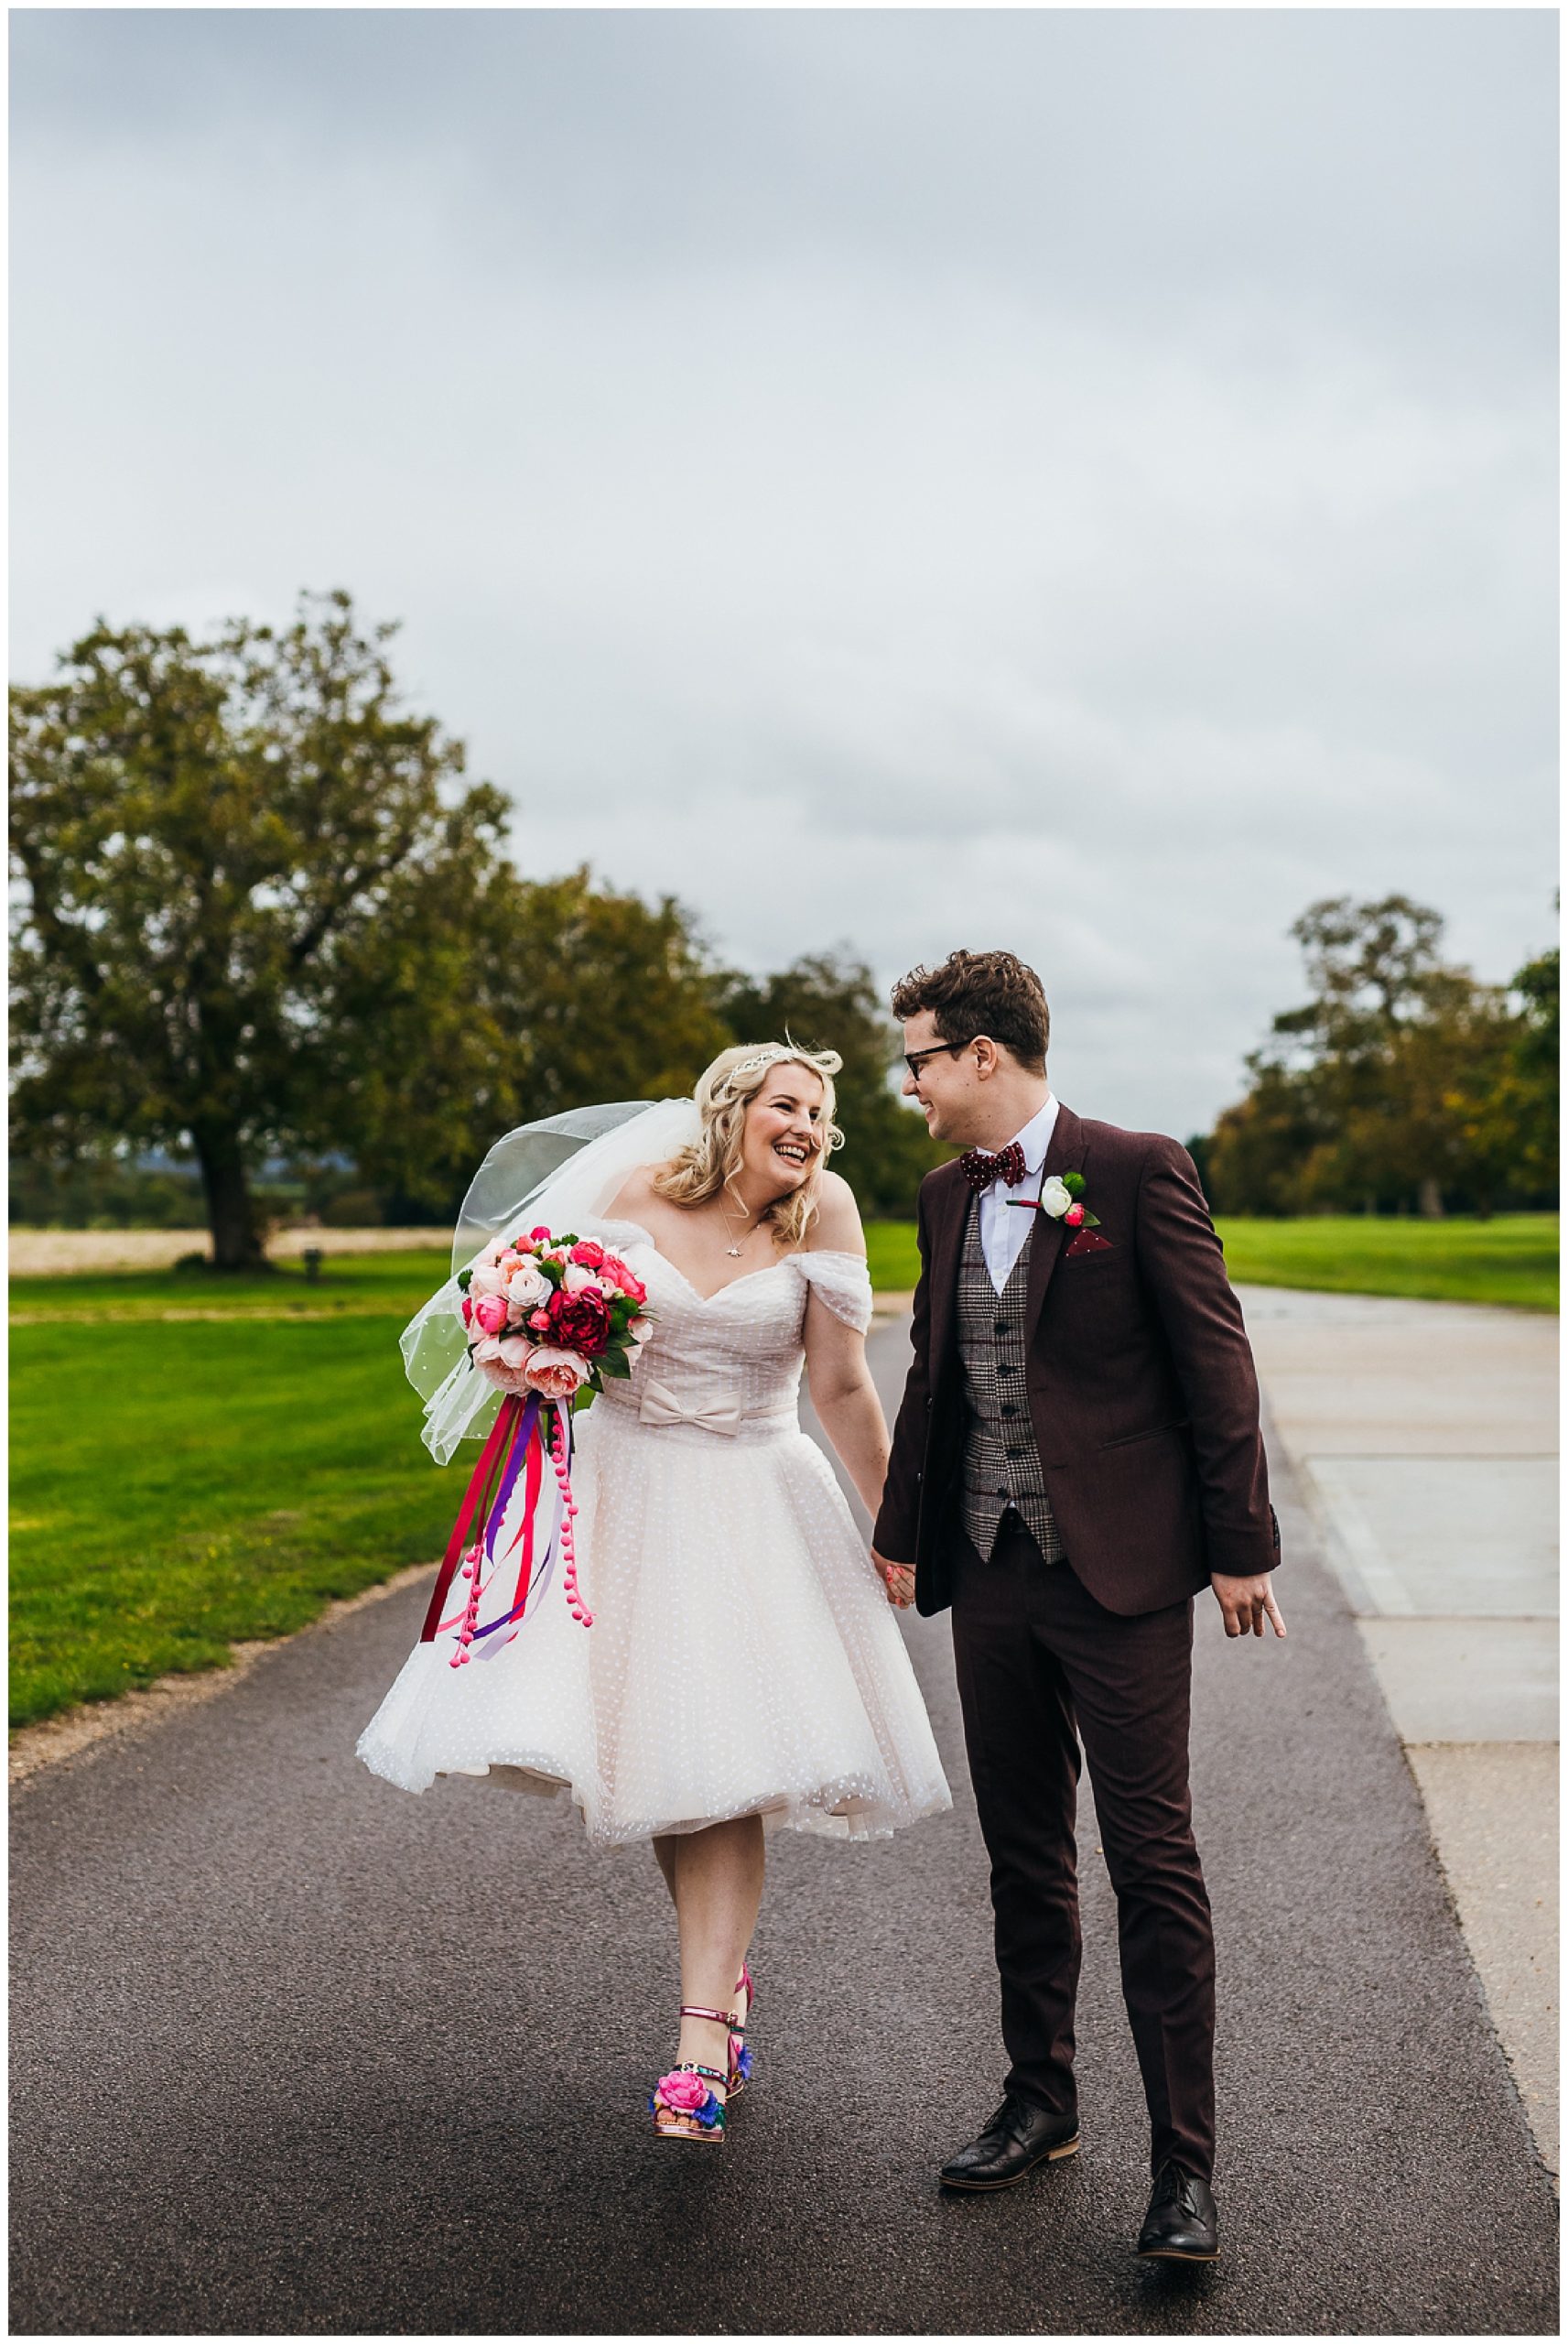 Bride in short dress and colourful shoes smiles at groom in burgundy suit and bow tie